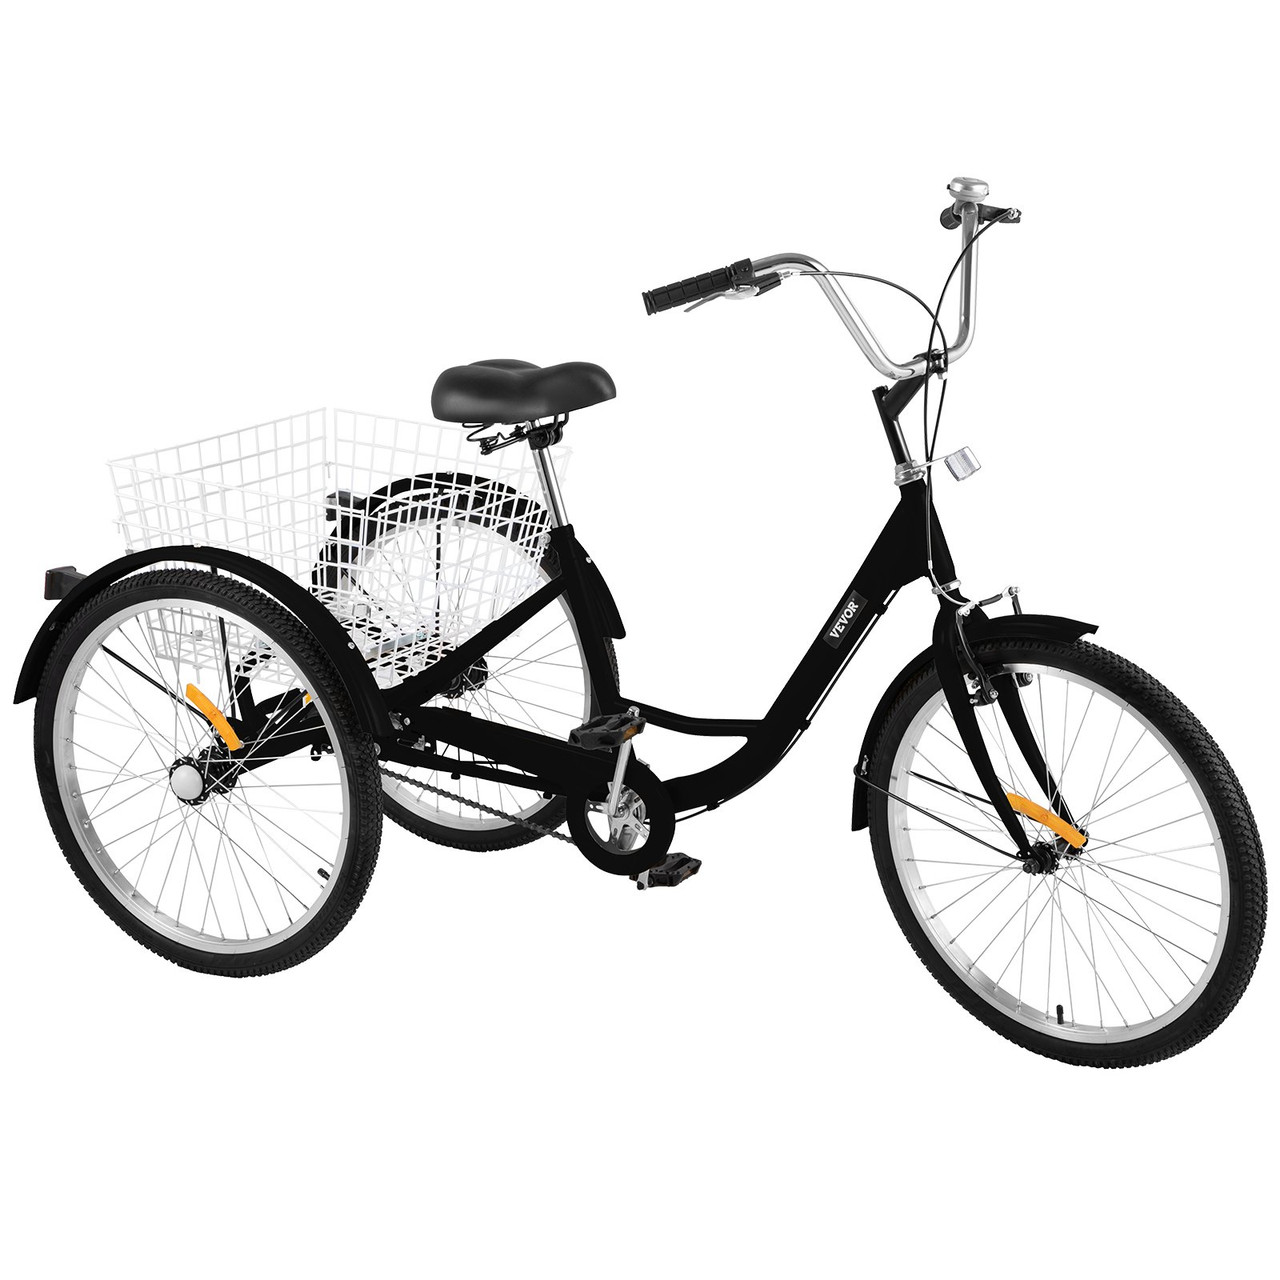 Adult Tricycle 20 inch Single Speed Size Adjustable Trike with Bell Brake System Cruiser Bicycles Large Size Basket for Recreation Shopping Exercise